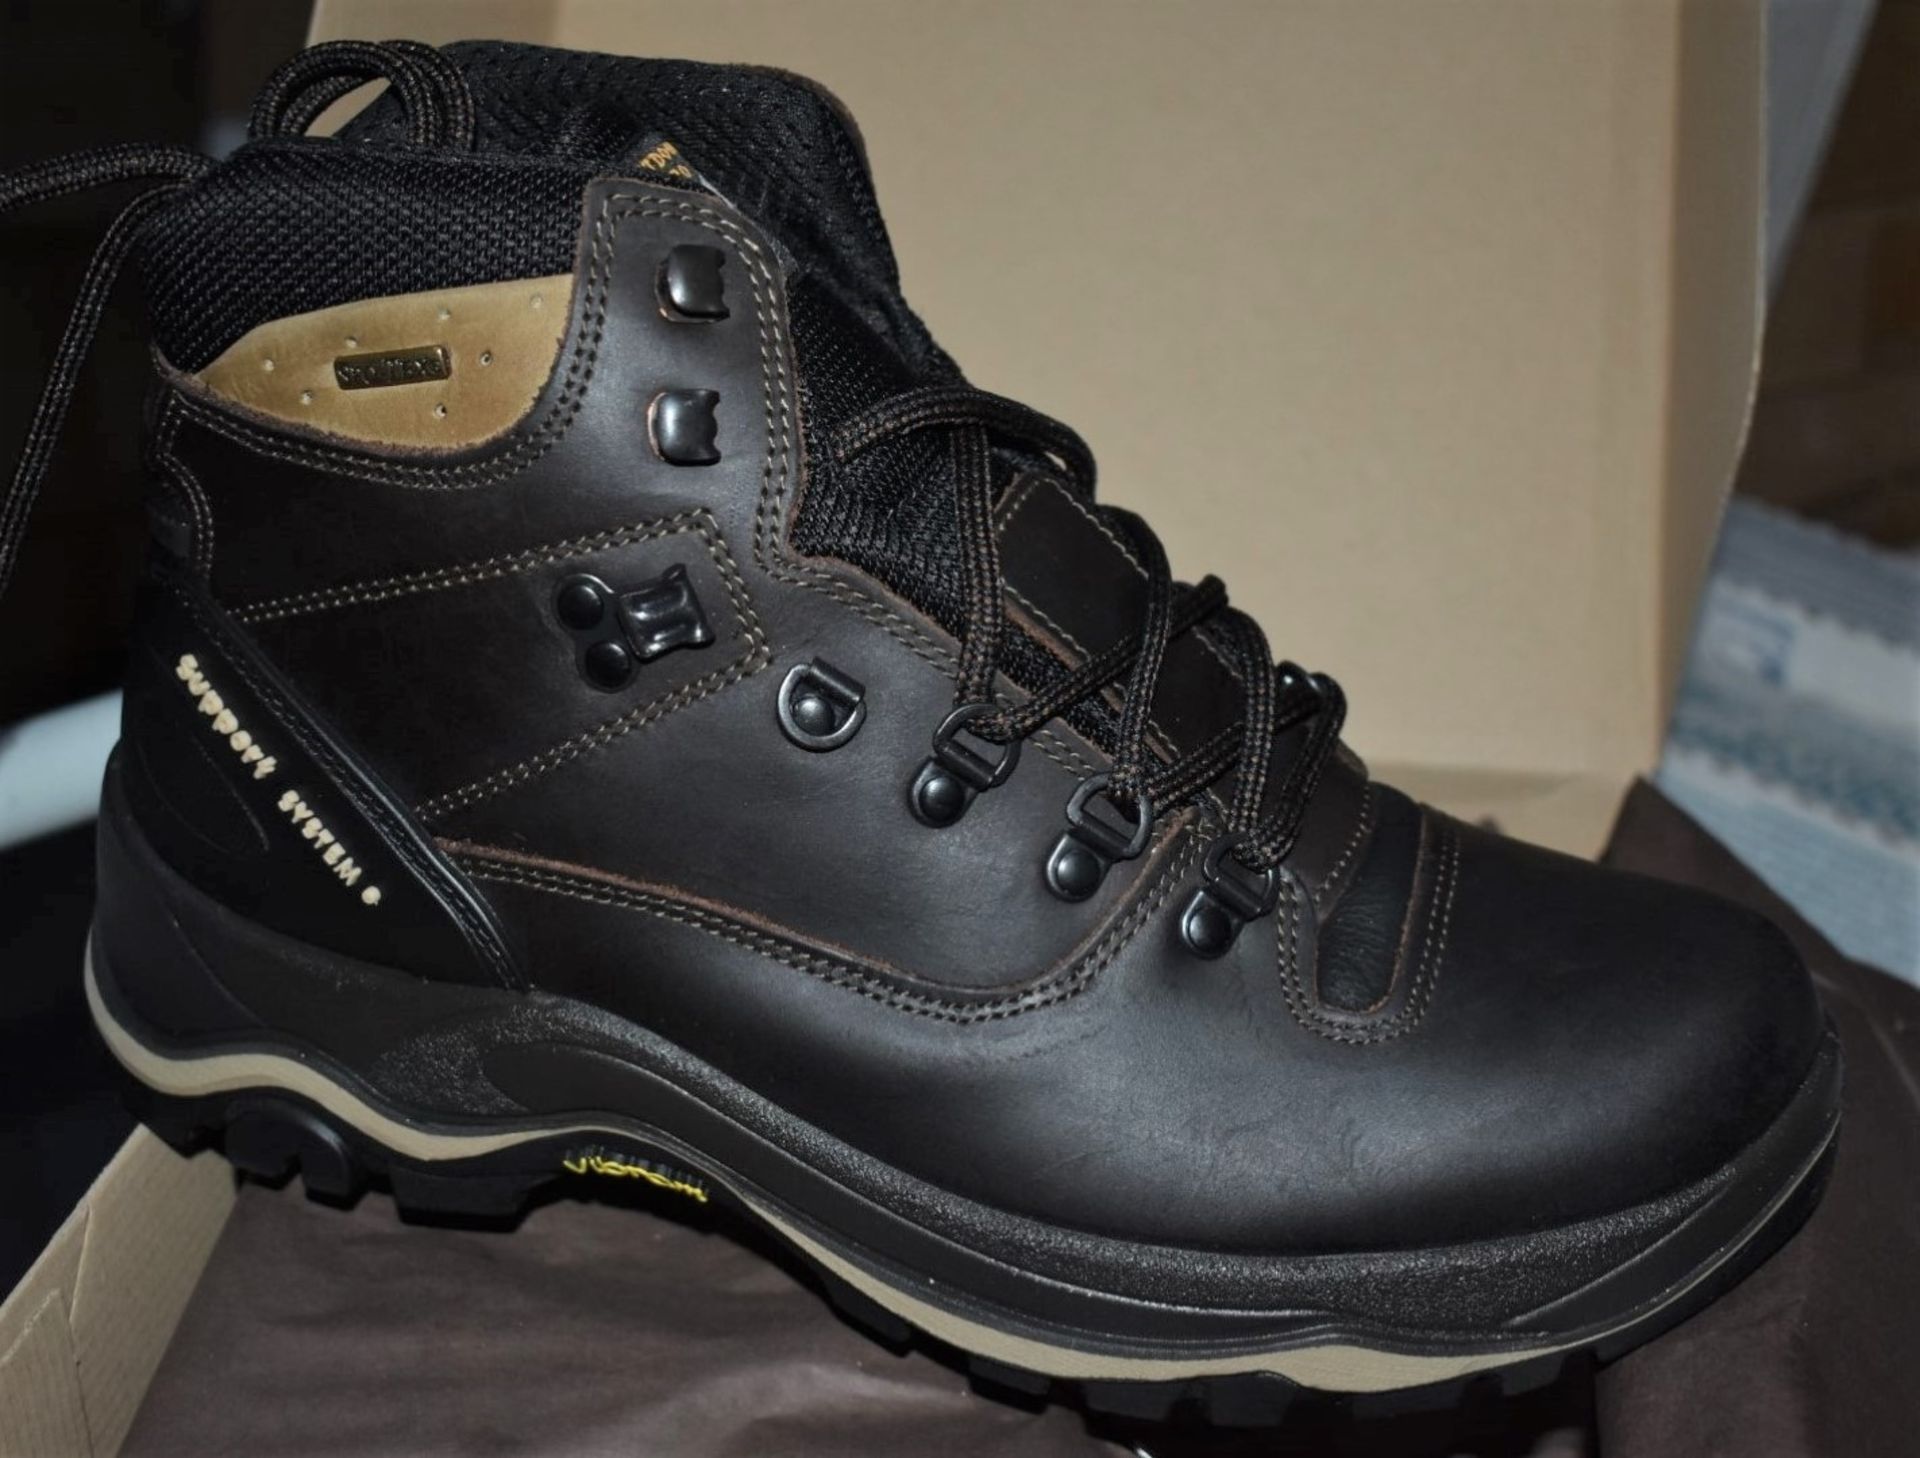 1 x Pair of Mens VIBRAM Walking Boots - Outdoor Pro Spo-Tex Trekking Boots With Support System - - Image 2 of 3